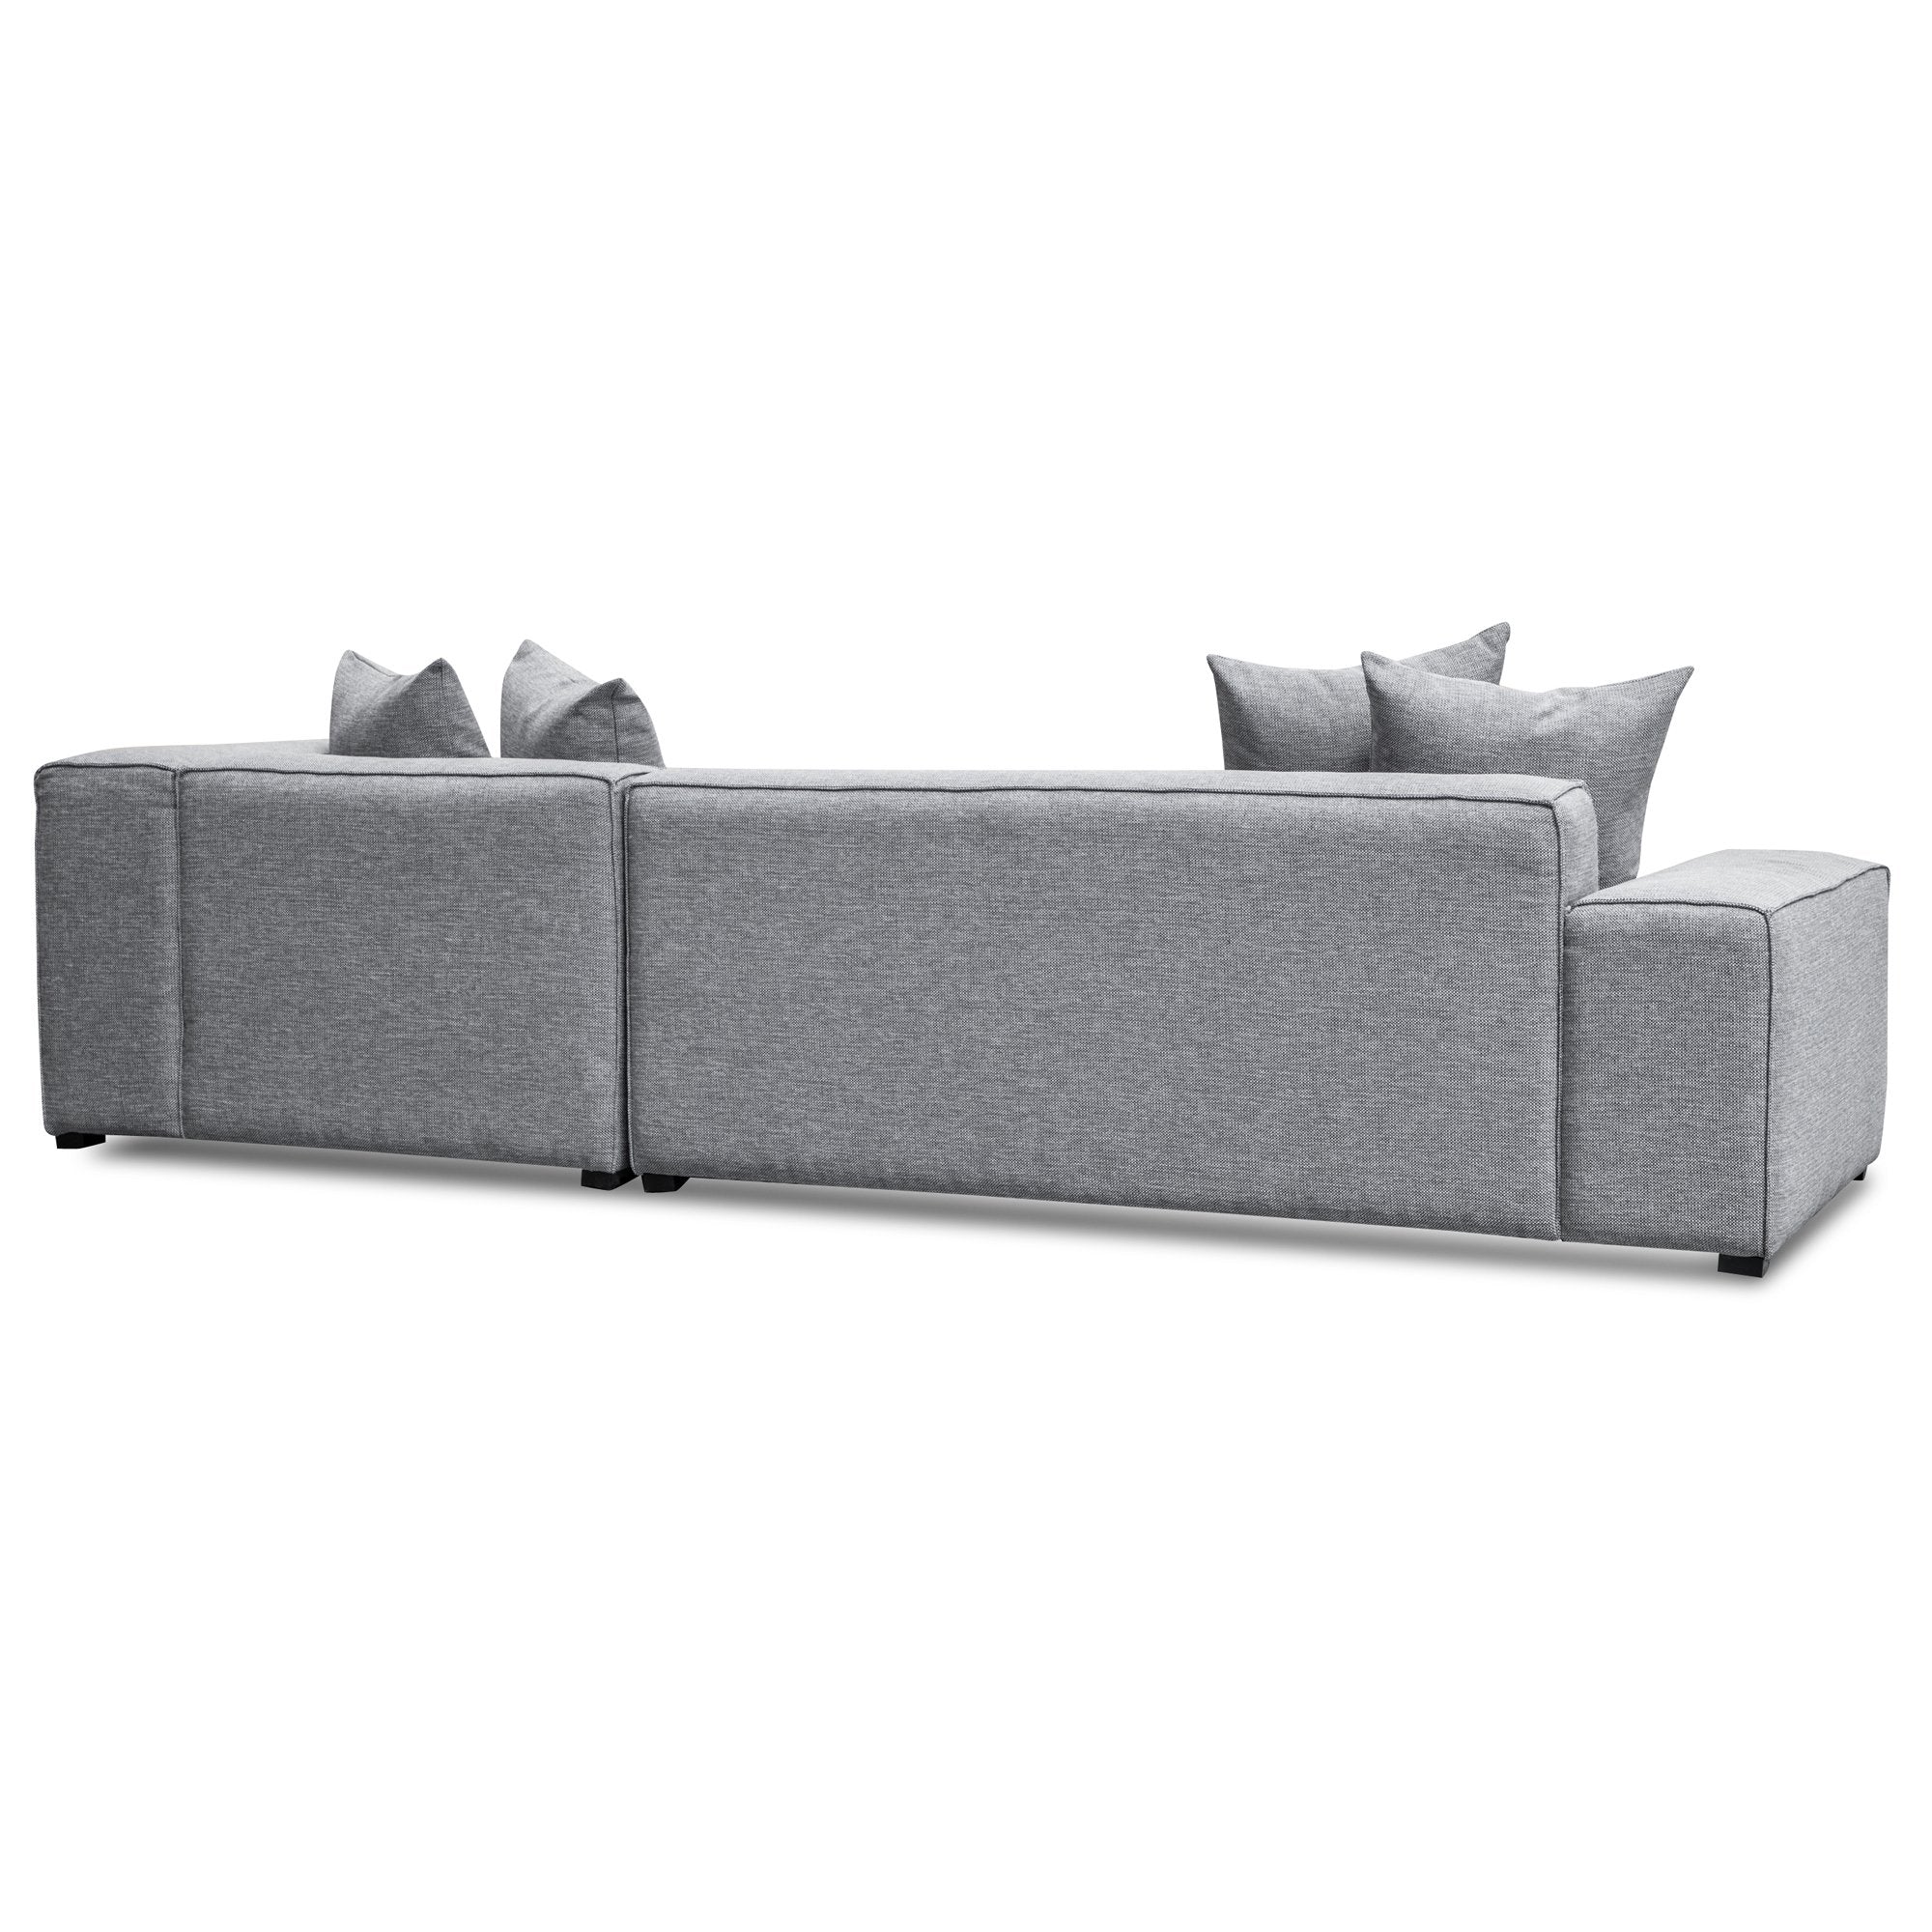 Charles 3S Right Chaise Sofa - Coin Grey - Sofas